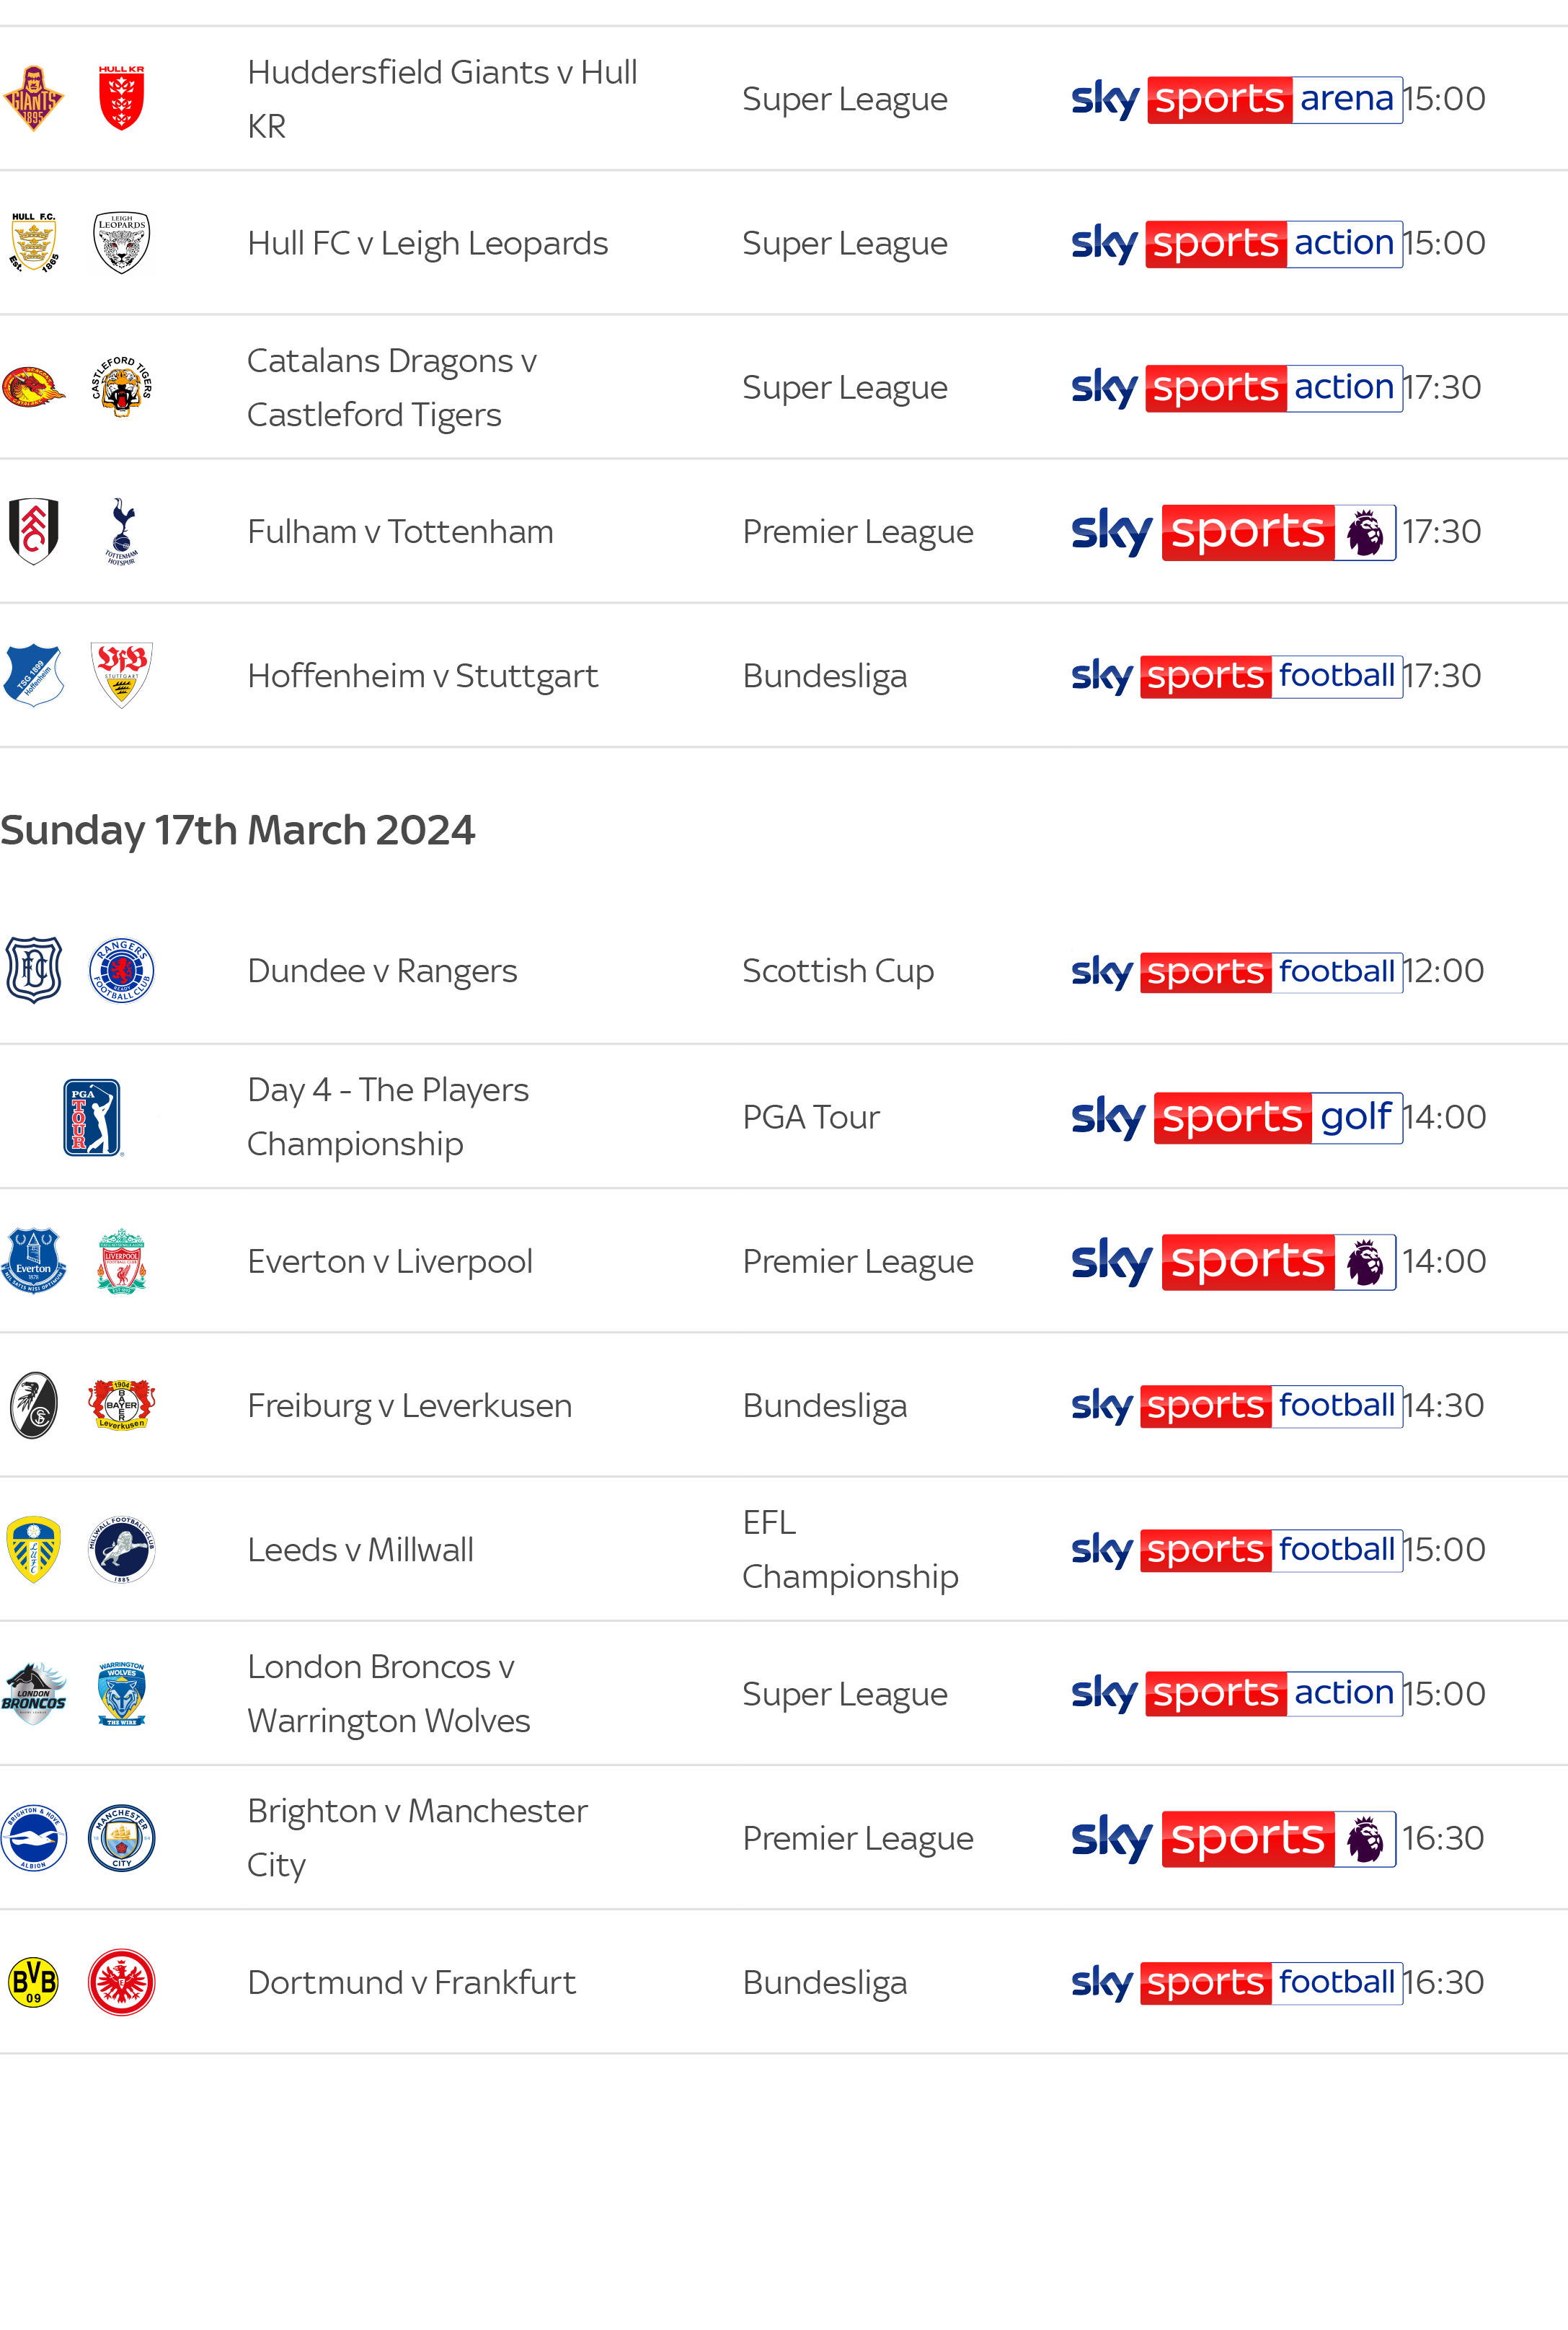 March Sky Sports fixtures